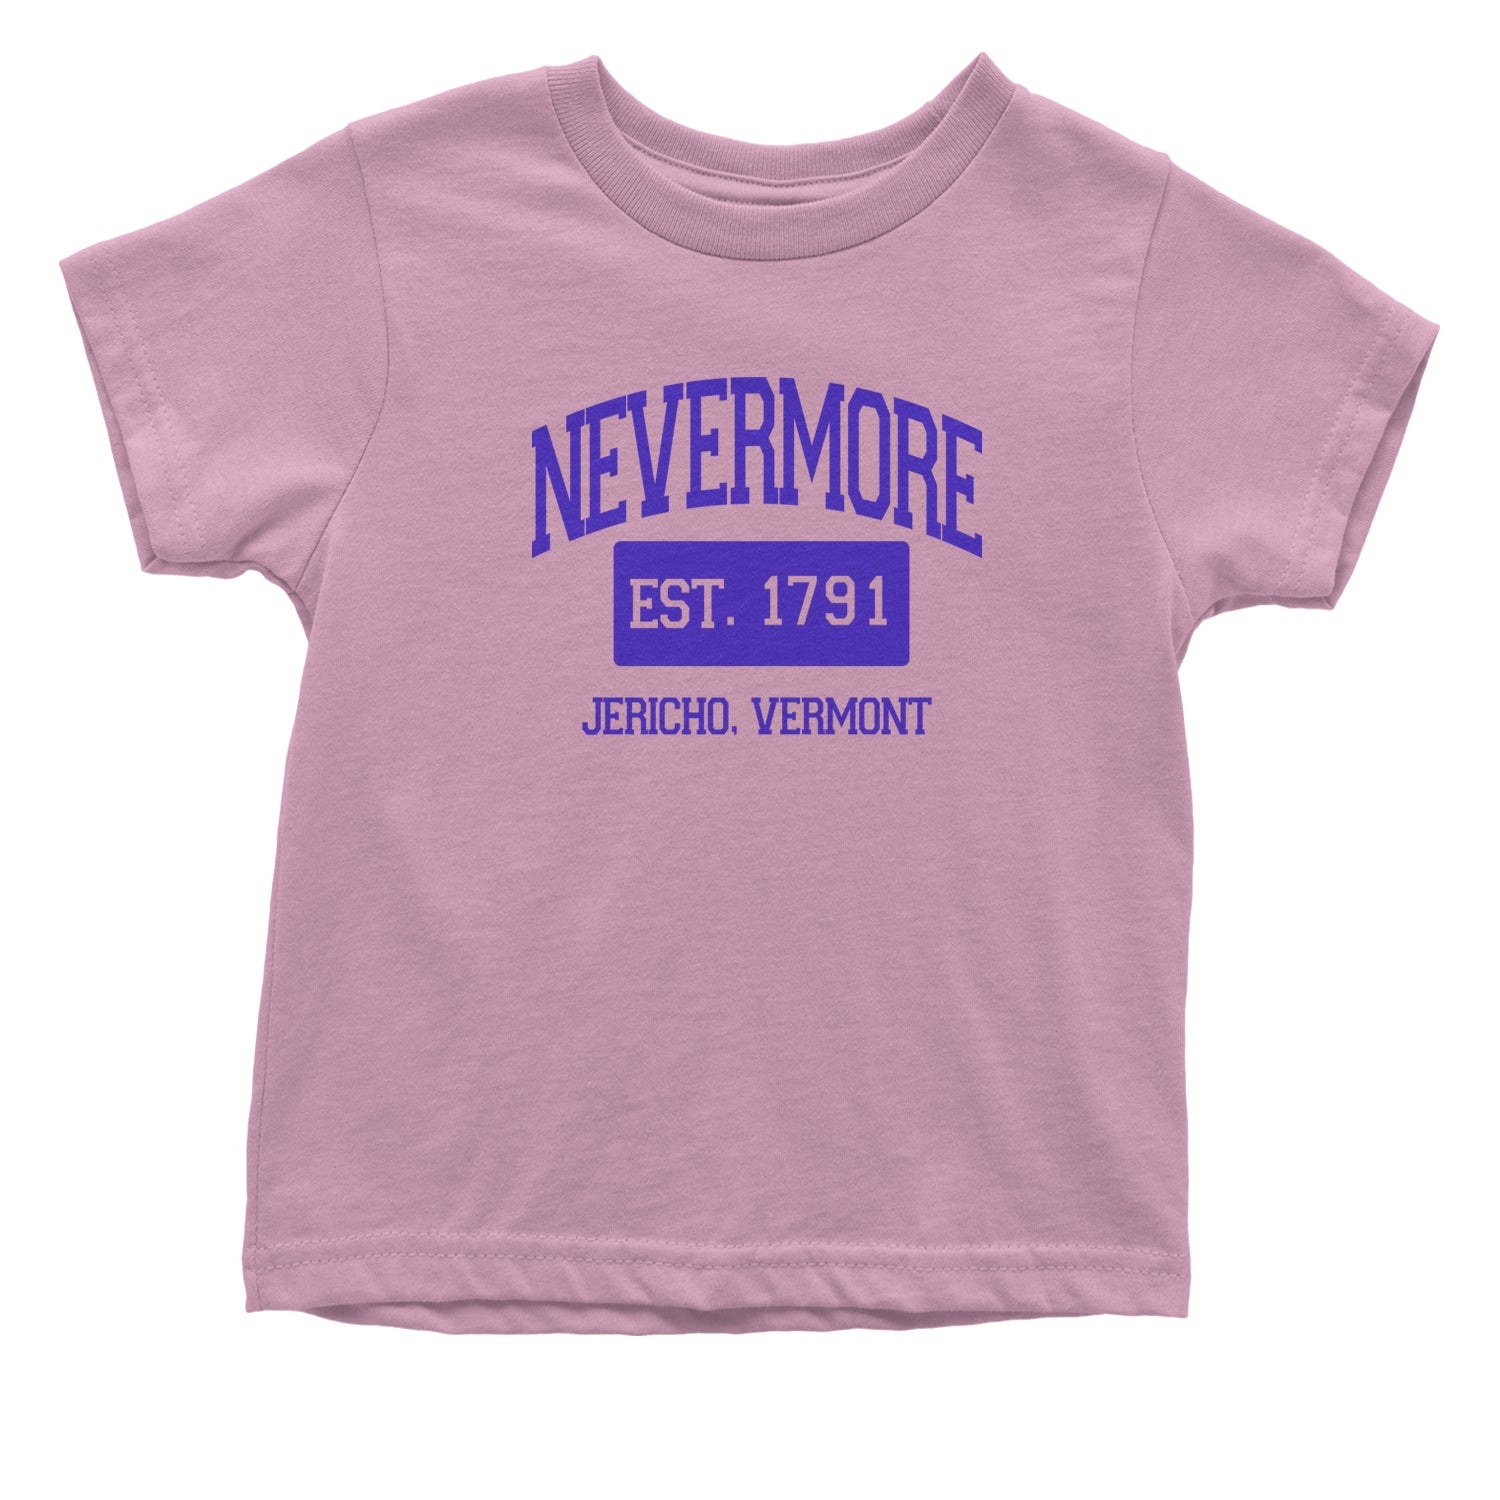 Nevermore Academy Wednesday Infant One-Piece Romper Bodysuit and Toddler T-shirt addams, family, gomez, morticia, pugsly, ricci, Wednesday by Expression Tees